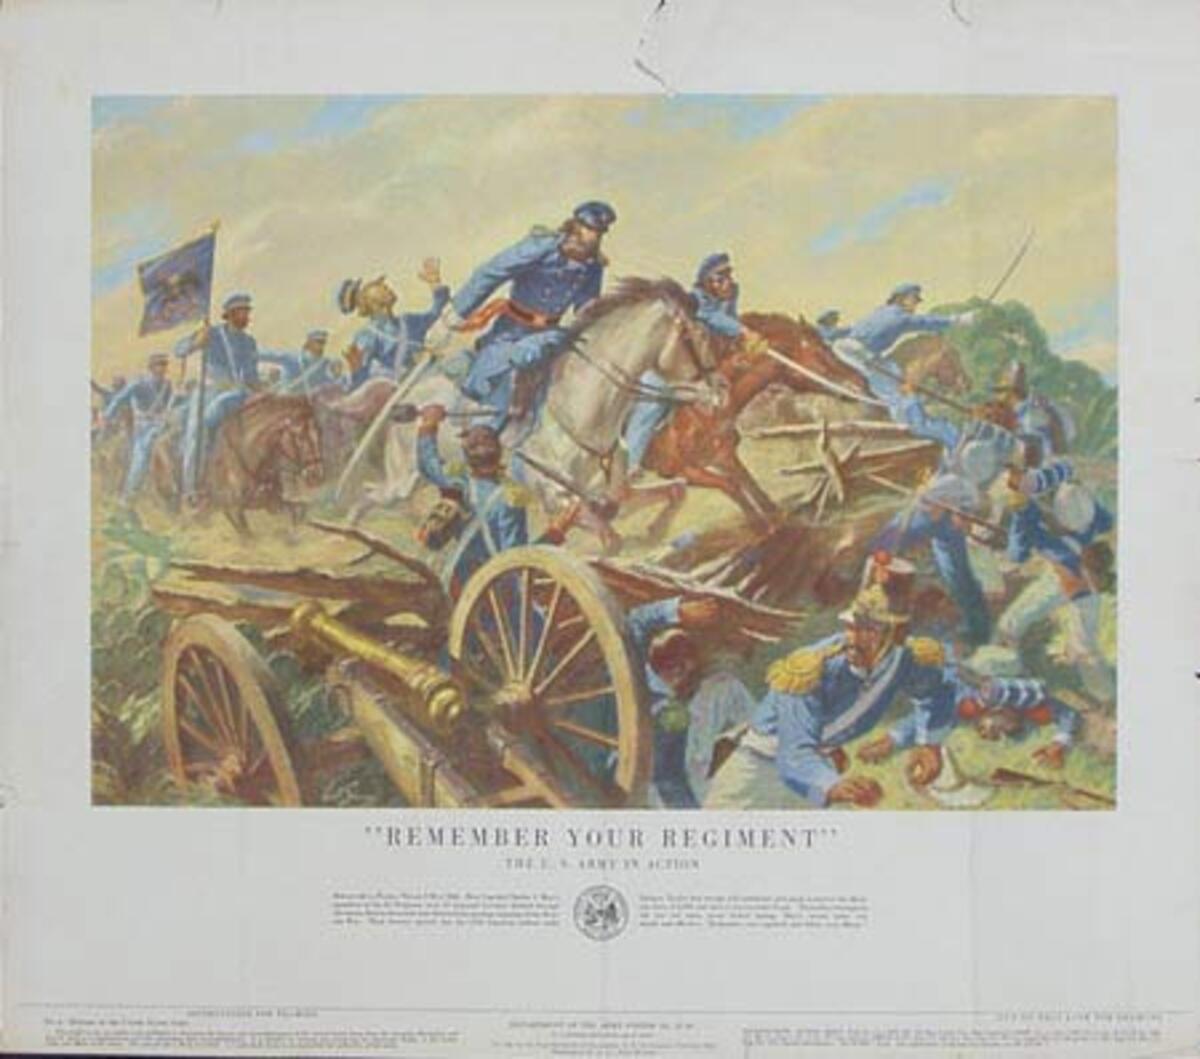 Remember Your Regiment U.S. Army in Action Original Vintage Army Propaganda Poster